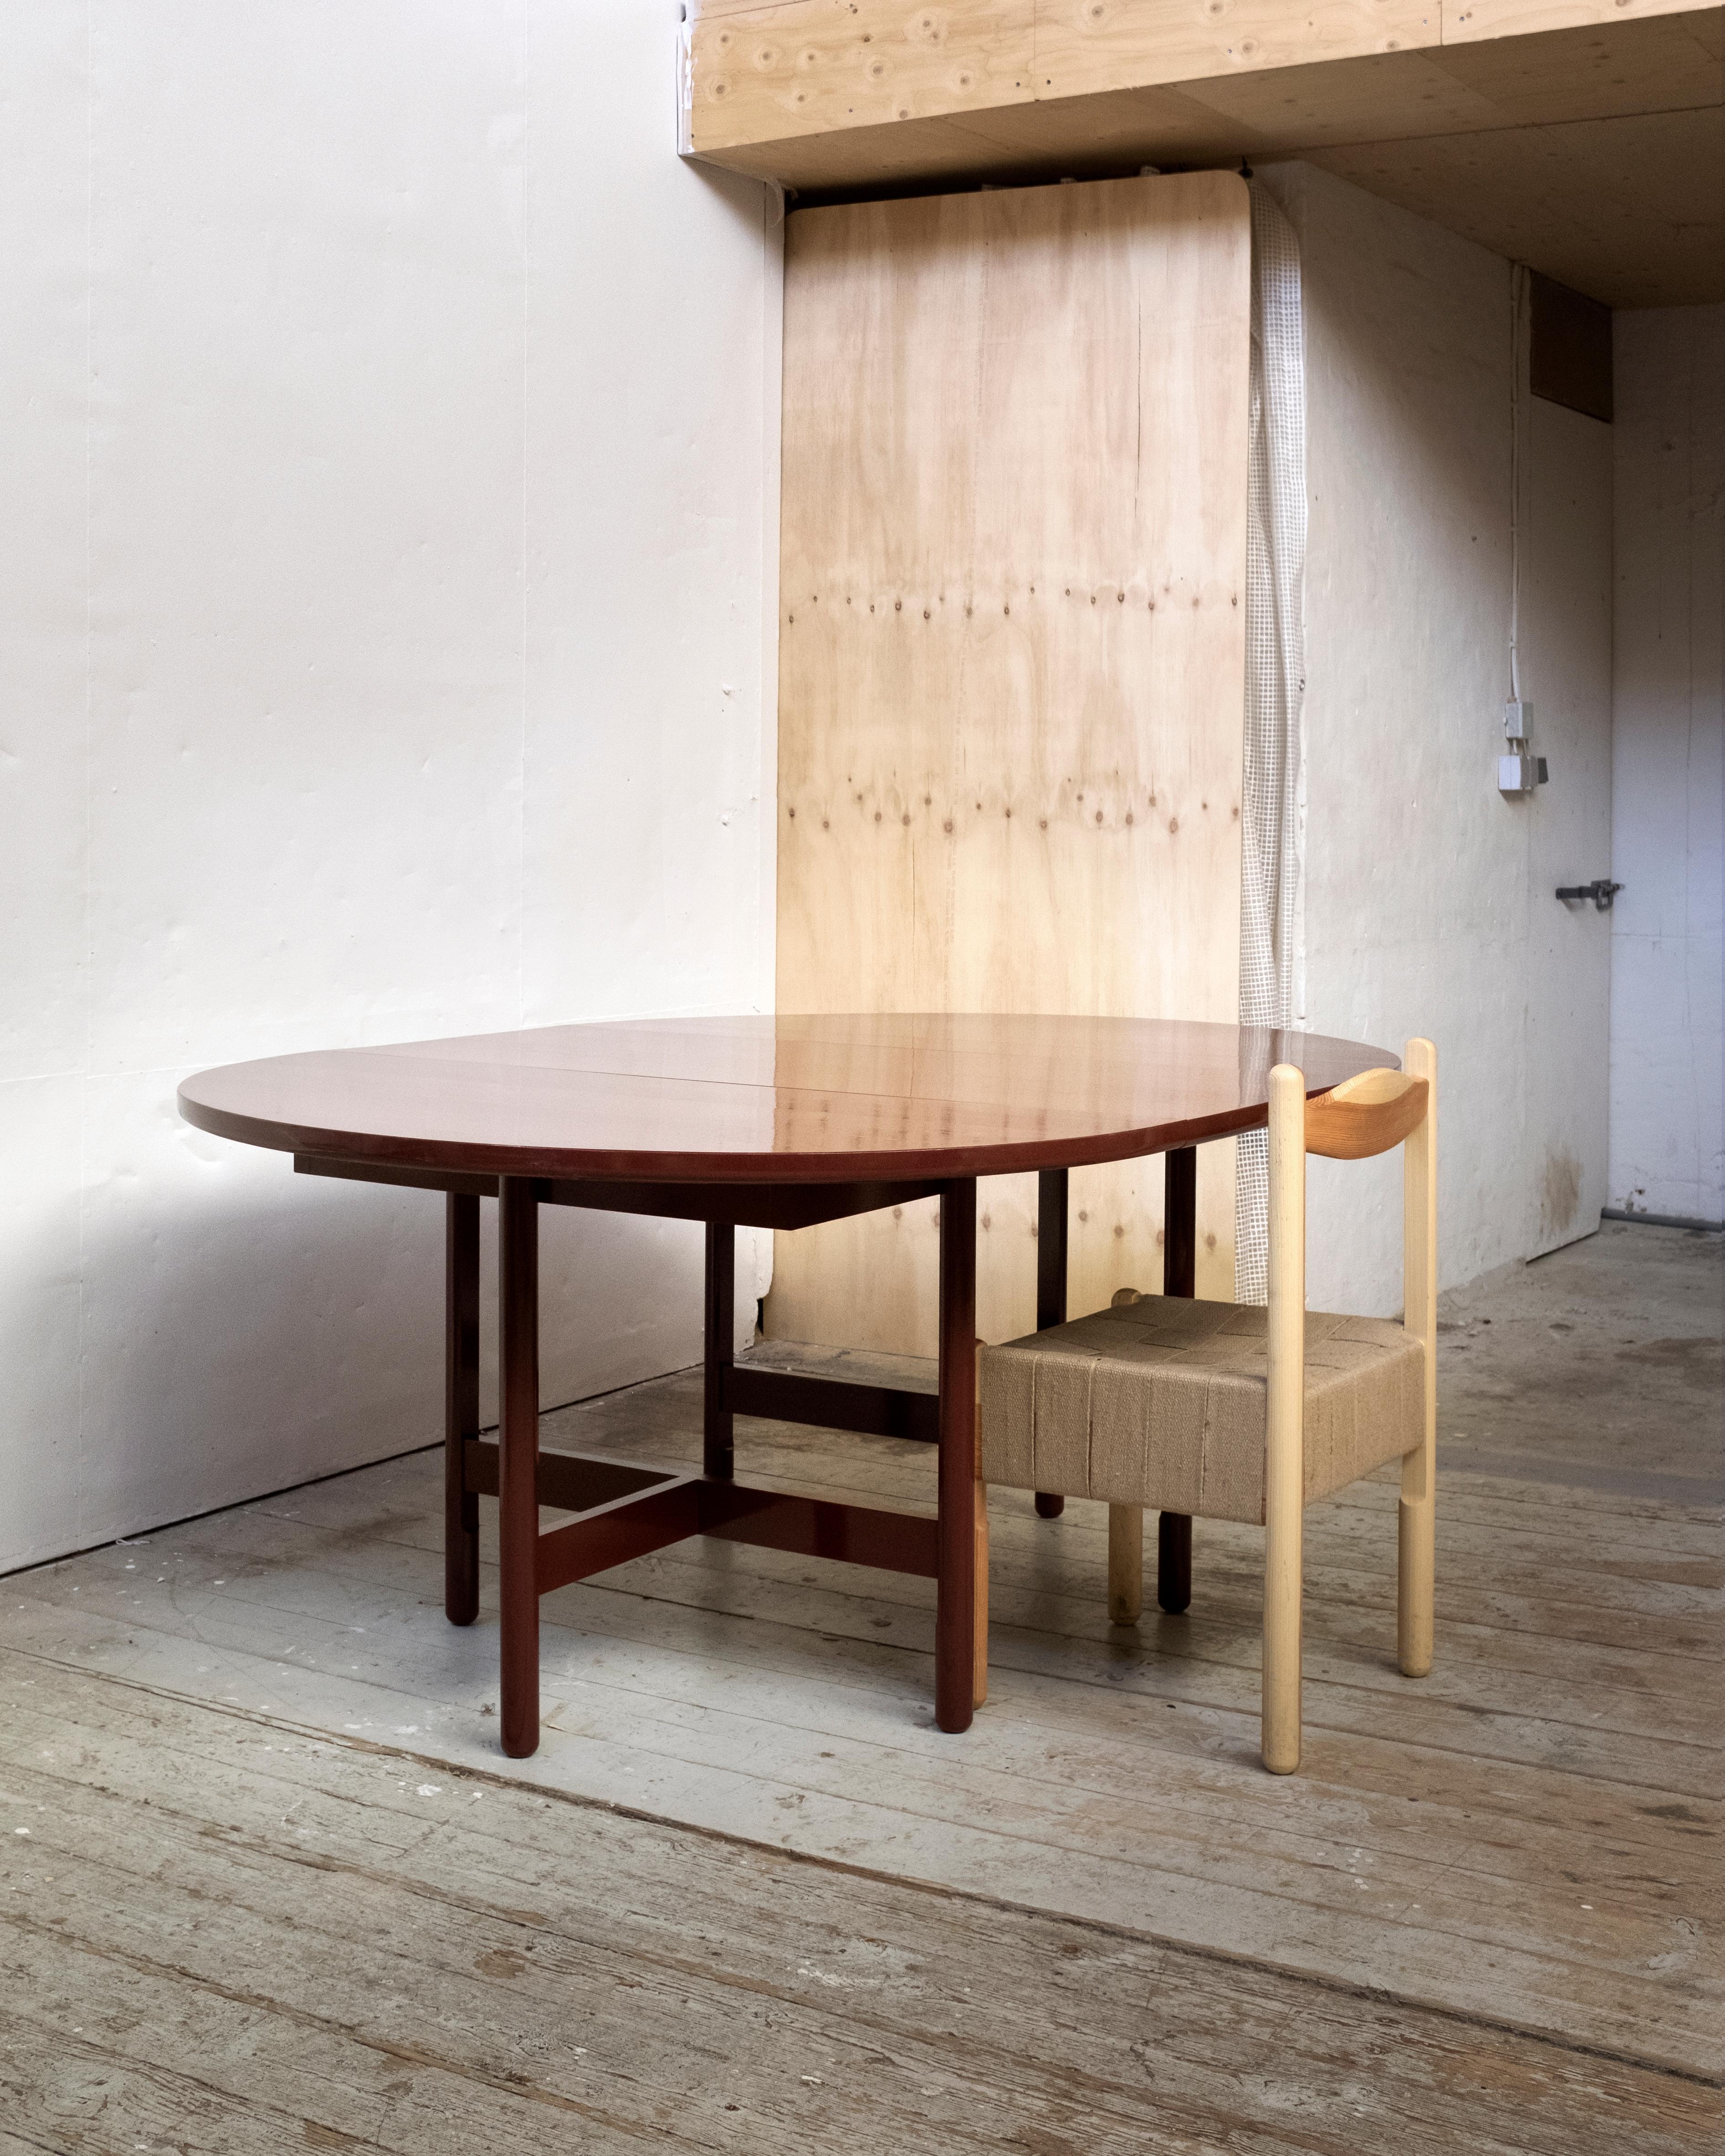 Handmade Thea Dining Table, Extendable Ø130cm - Painted Oak - by BACD studio In New Condition For Sale In Værløse, DK